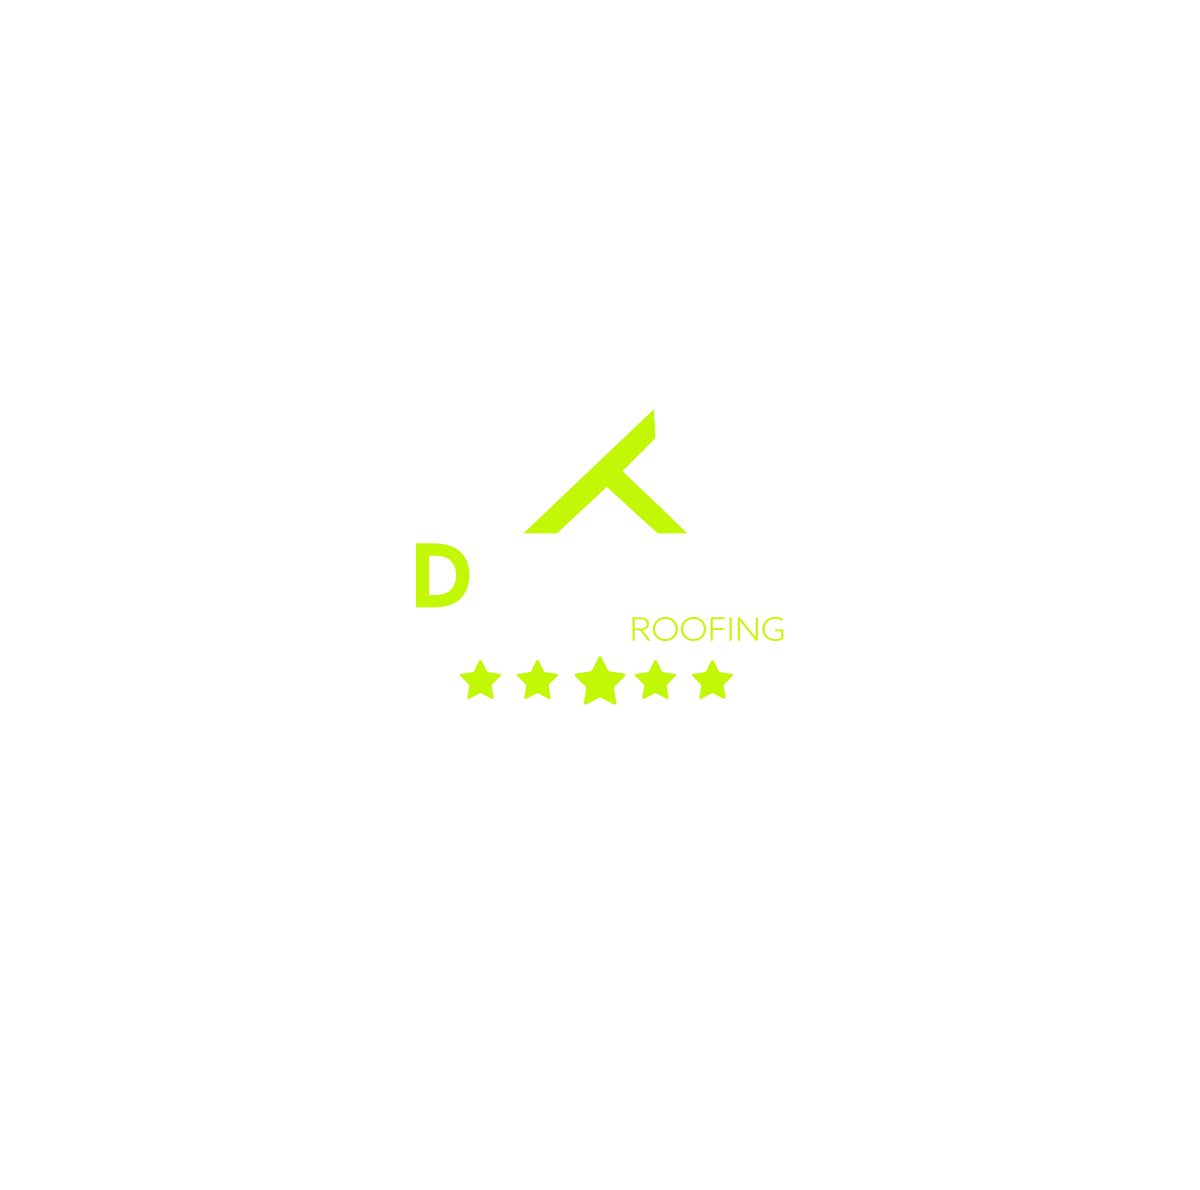 D Tasker Roofing logo in lime green and white